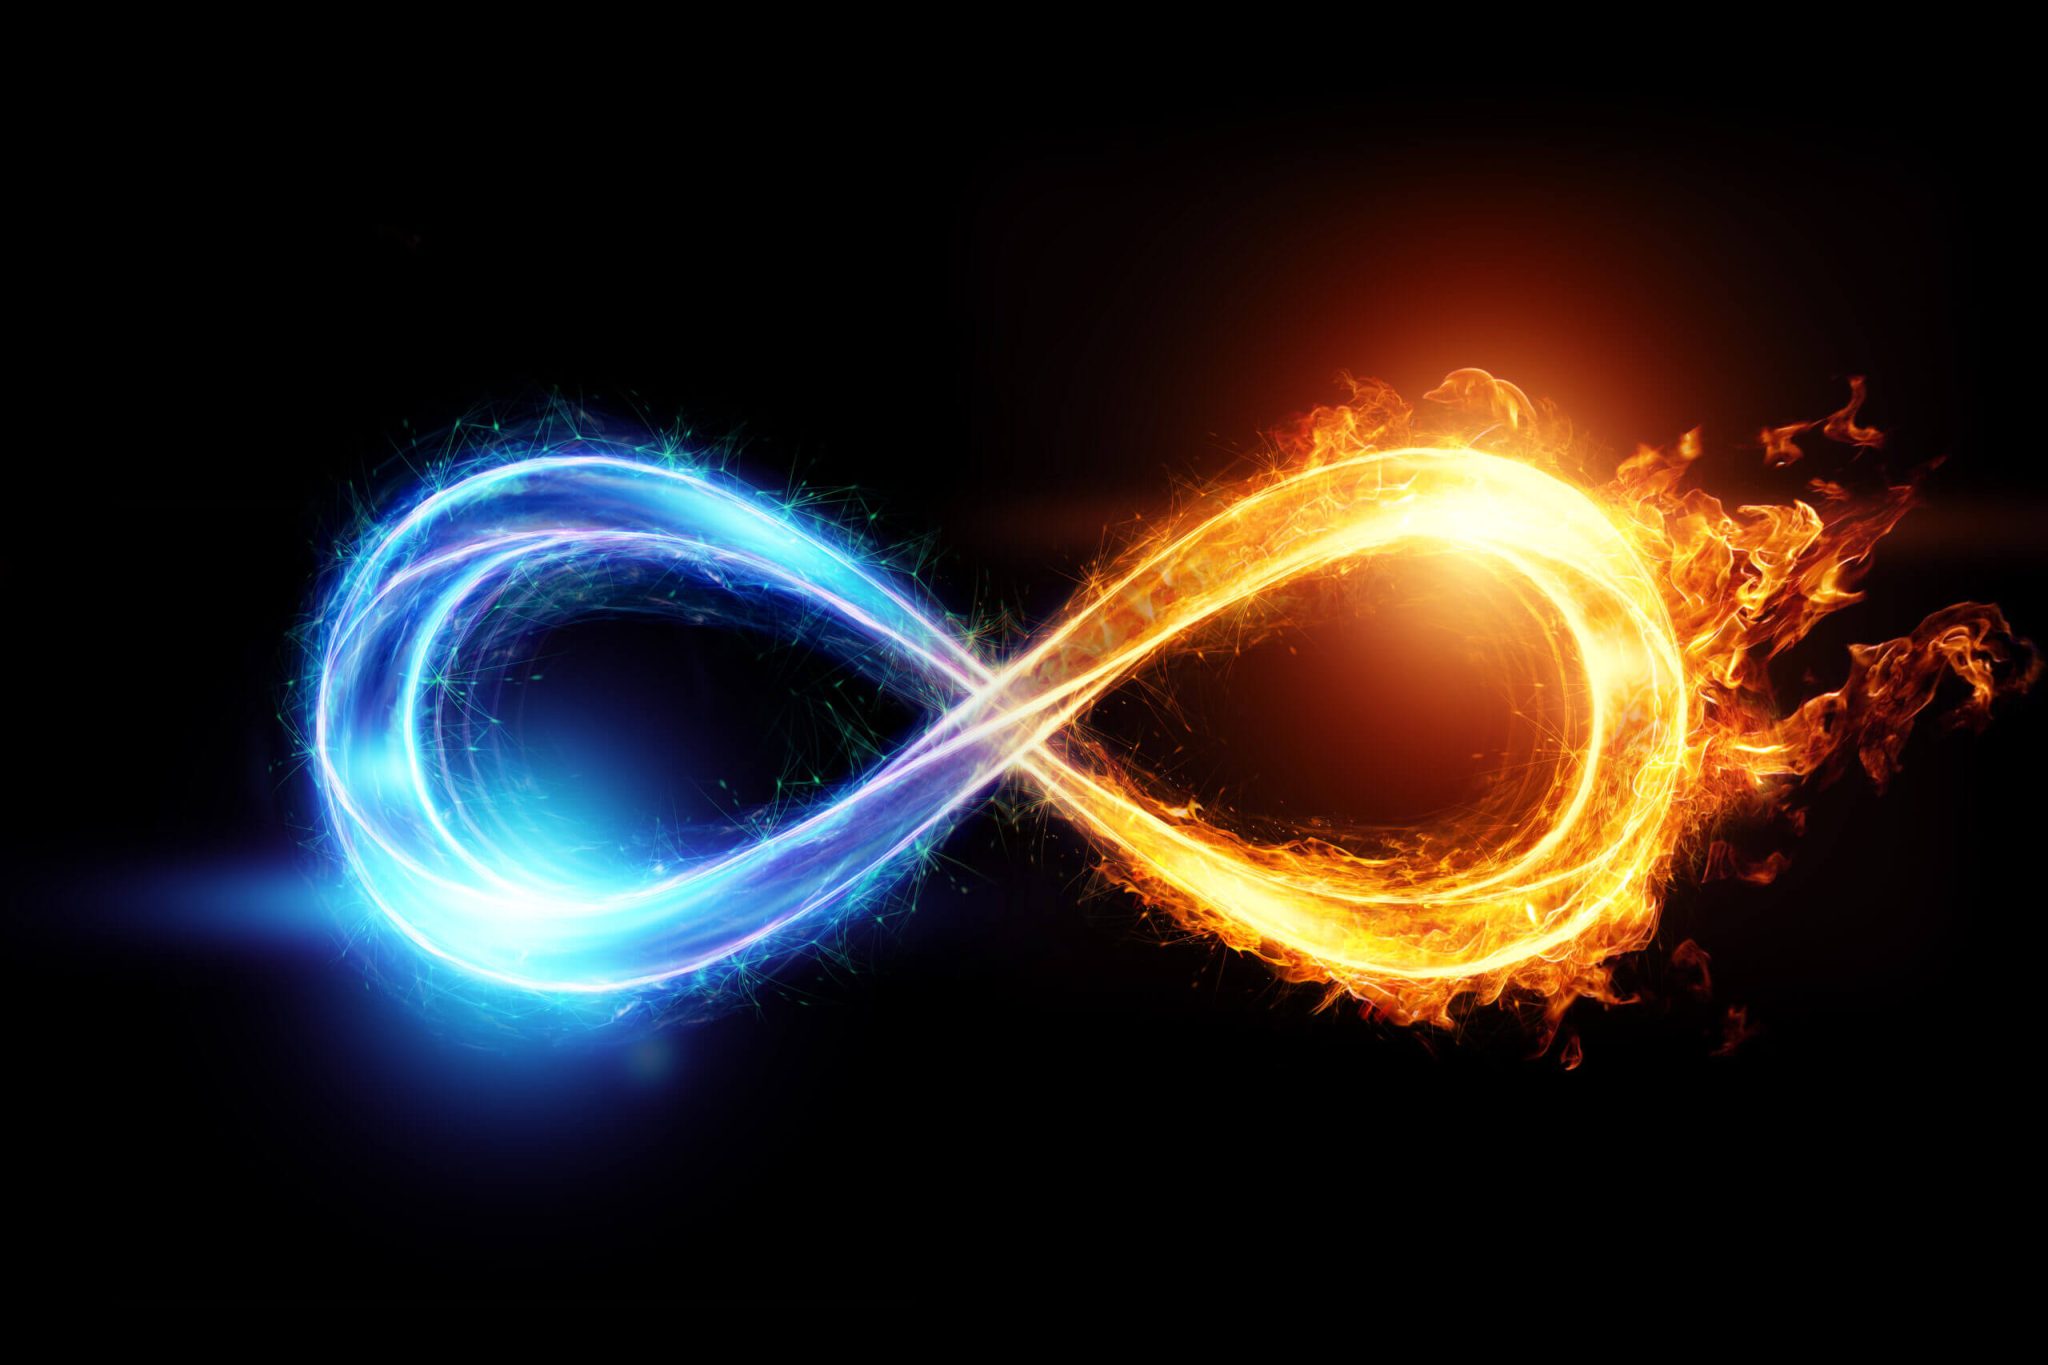 Firey infinity symbol in blue and yellow